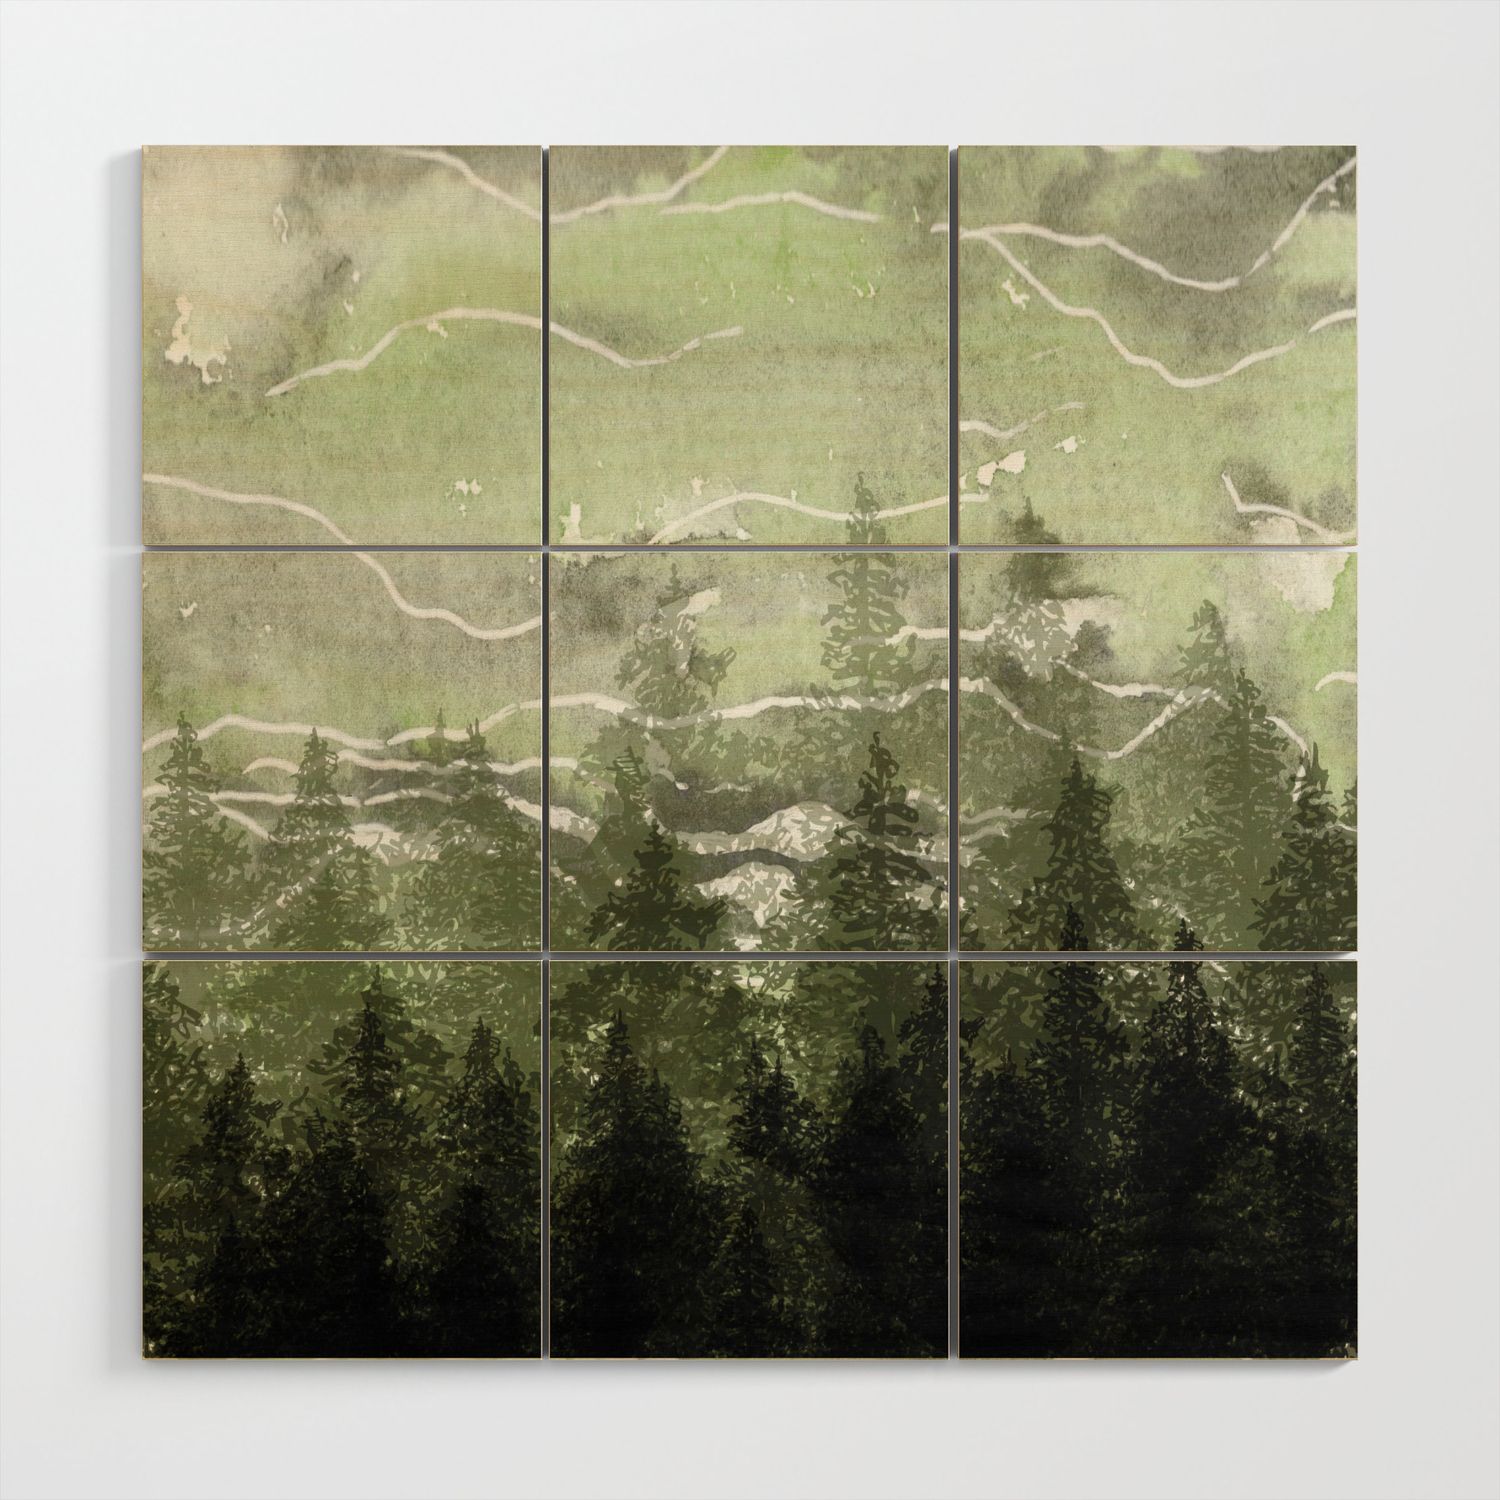 Misty Pines Wood Wall Artrskinner1122 | Society6 With Regard To Recent Misty Pines Wall Art (View 18 of 20)